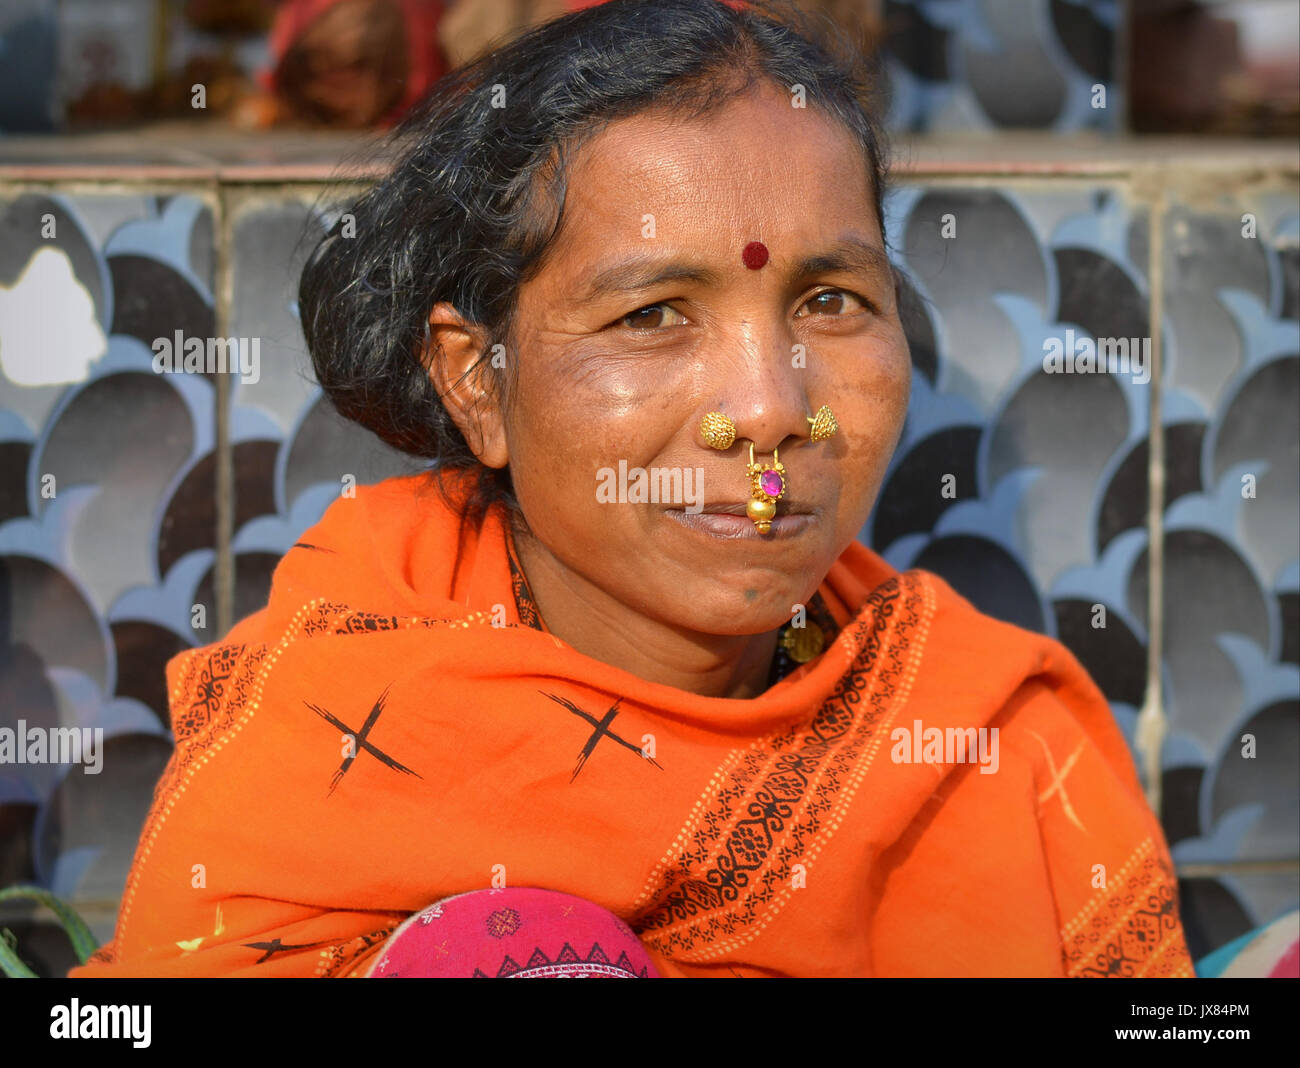 indian adivasi woman with two nose studs and septum nose jewellery JX84PM